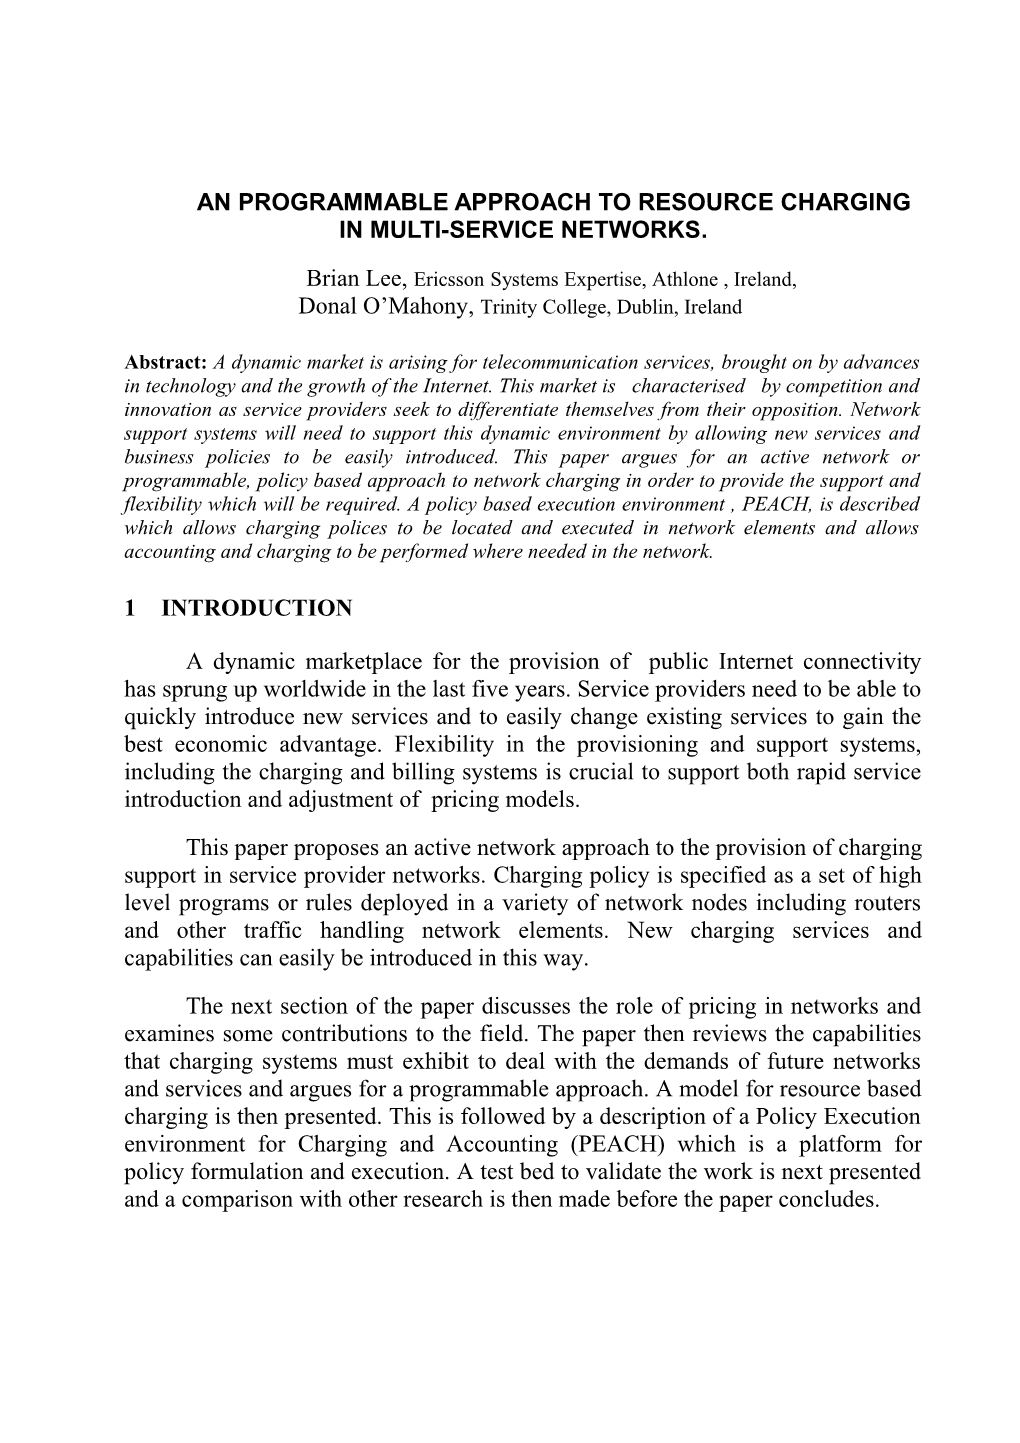 A Policy Based Charging System for Multiservice Networks